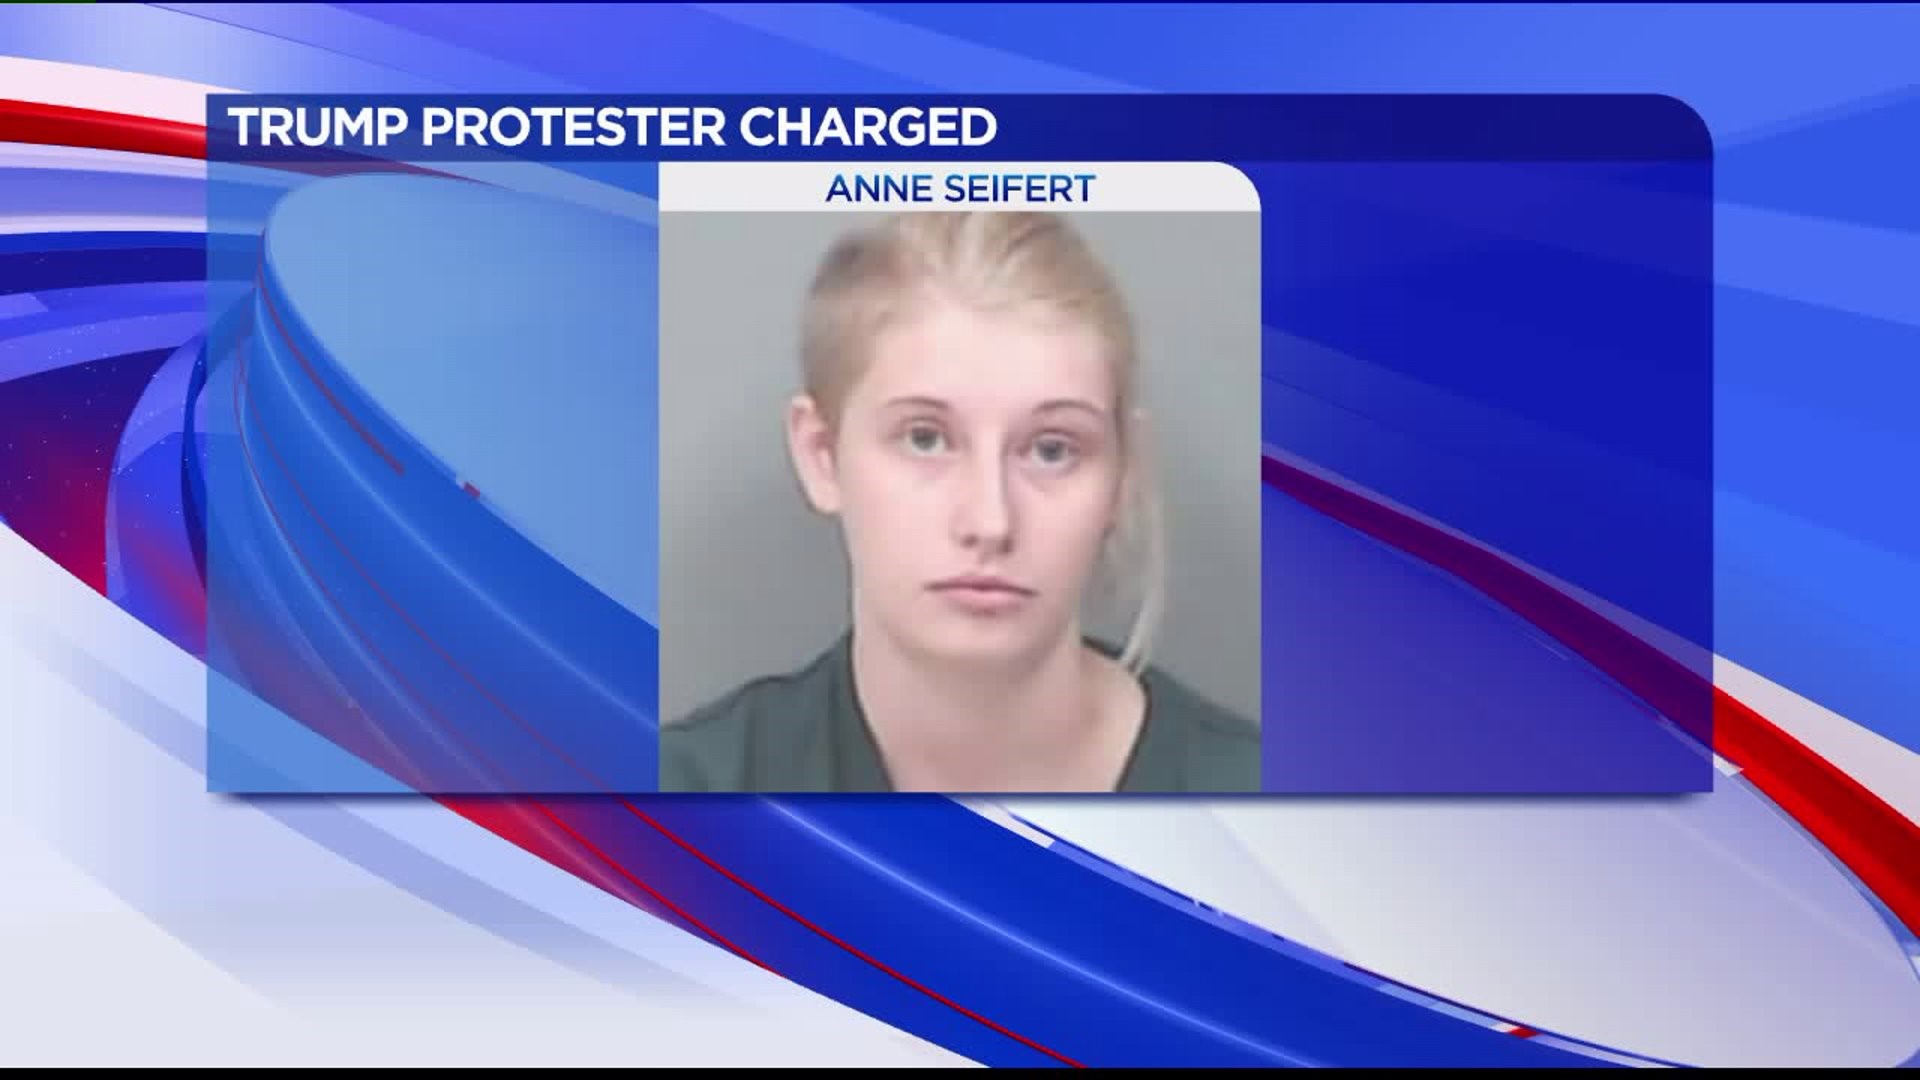 Protester charged with assault